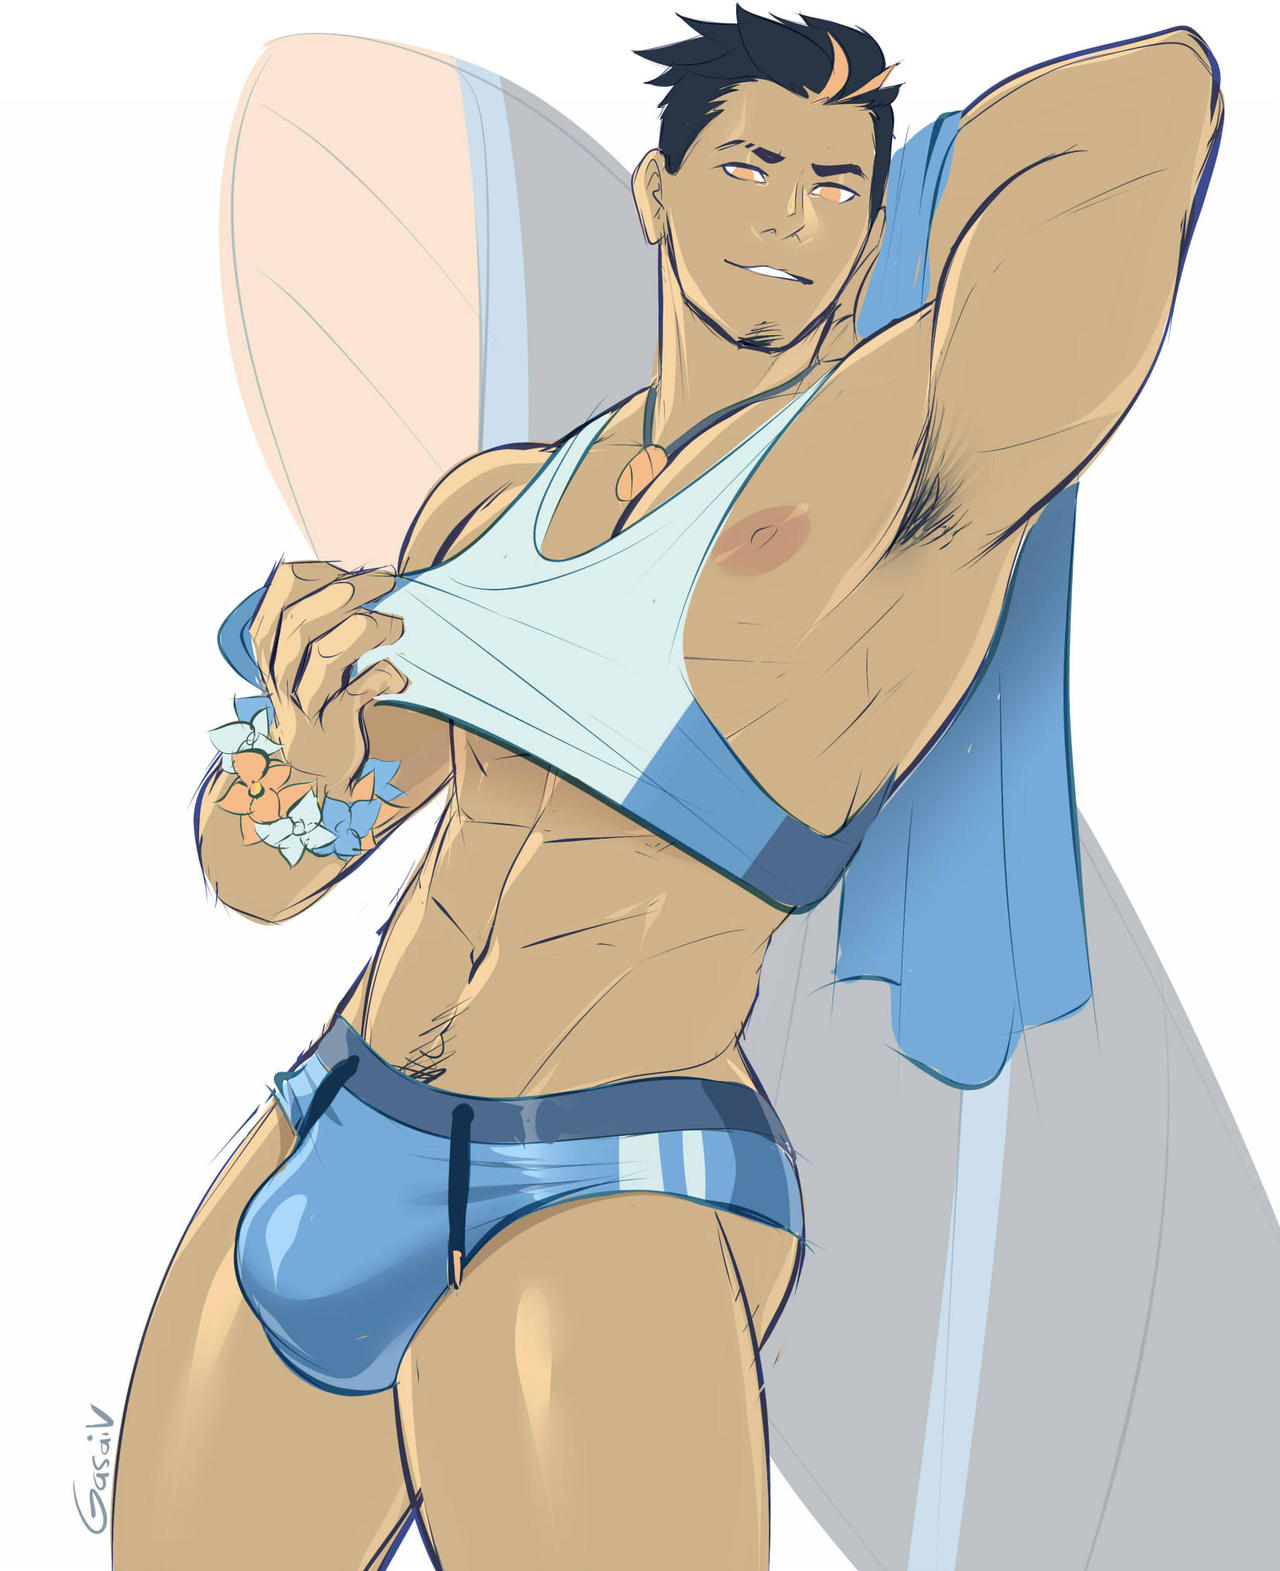 1boy abs arm_up armpit_hair armpits black_hair bulge cocky eyebrow_slits facial_hair flower_bracelet gasaiv gijinka goatee hand_behind_head looking_at_viewer male male_only muscular muscular_arms necklace nipples orange_hair pecs pokemon pokemon_rse pubic_hair shirt_lift smile smiling_at_viewer solo solo_male standing surfboard surfer swampert swimming_trunks swimwear tank_top tank_top_lift two_tone_hair